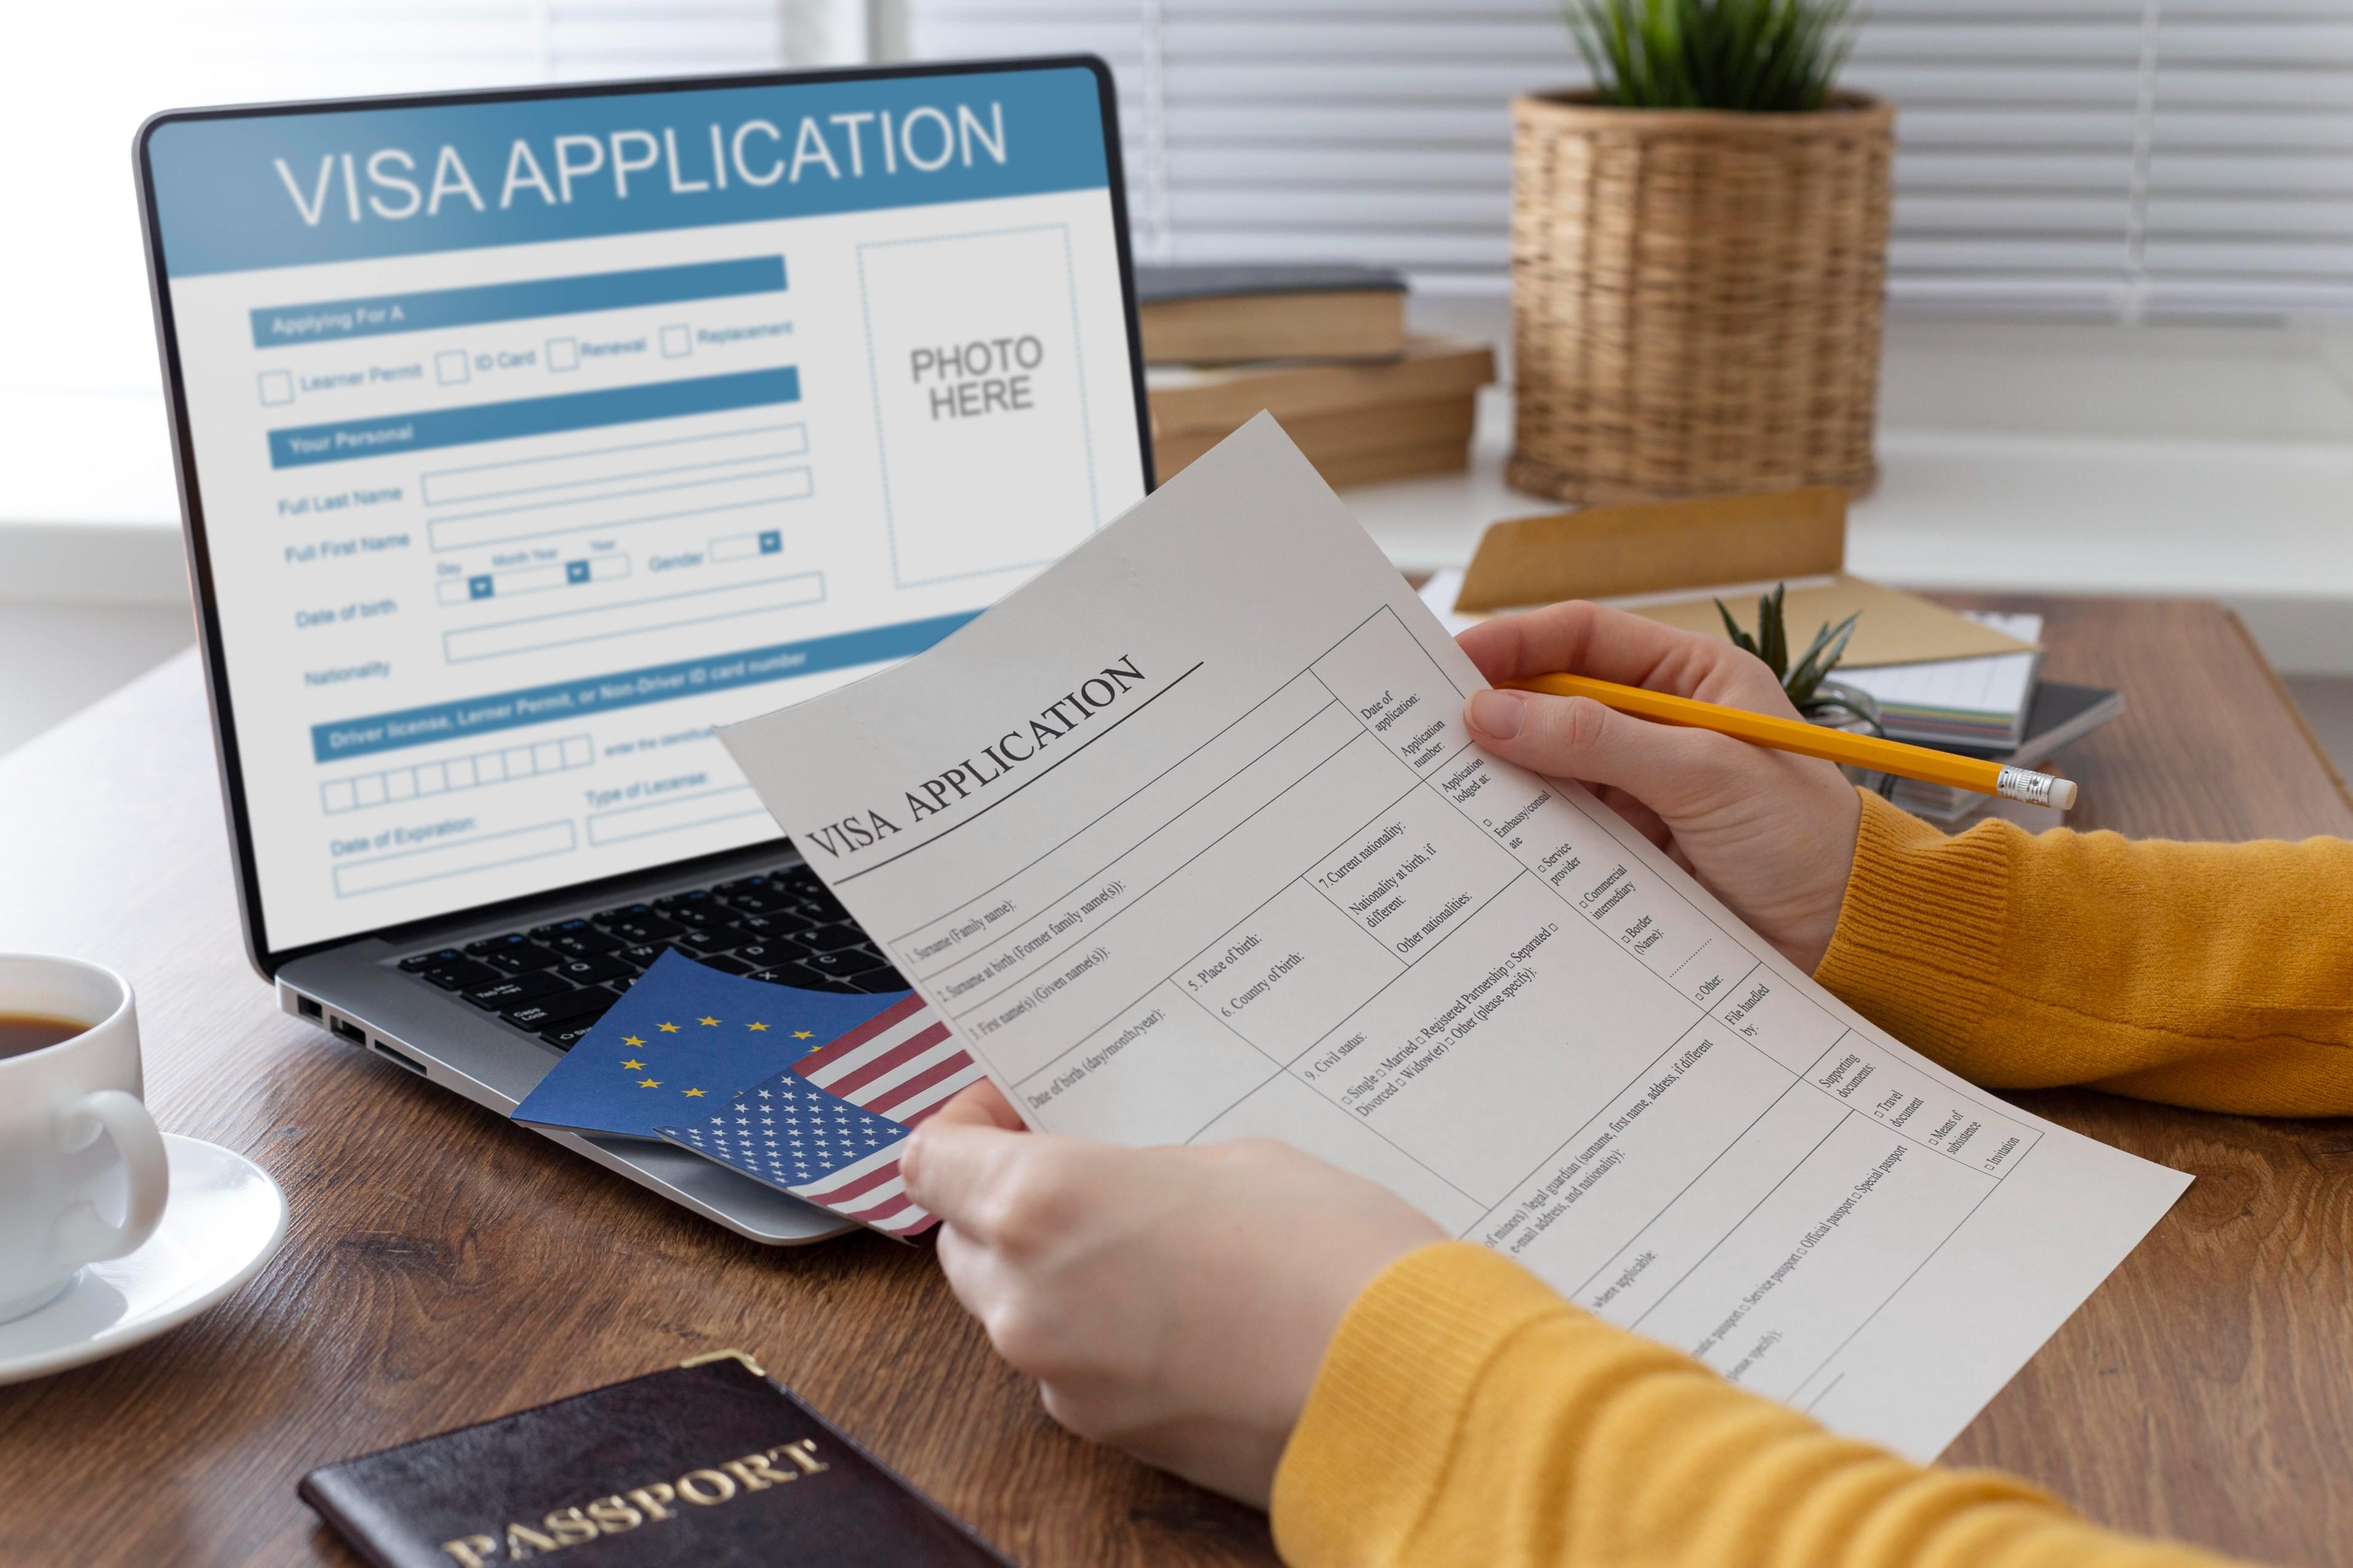 visa-application-composition-with-europe-america-flag (1).jpg